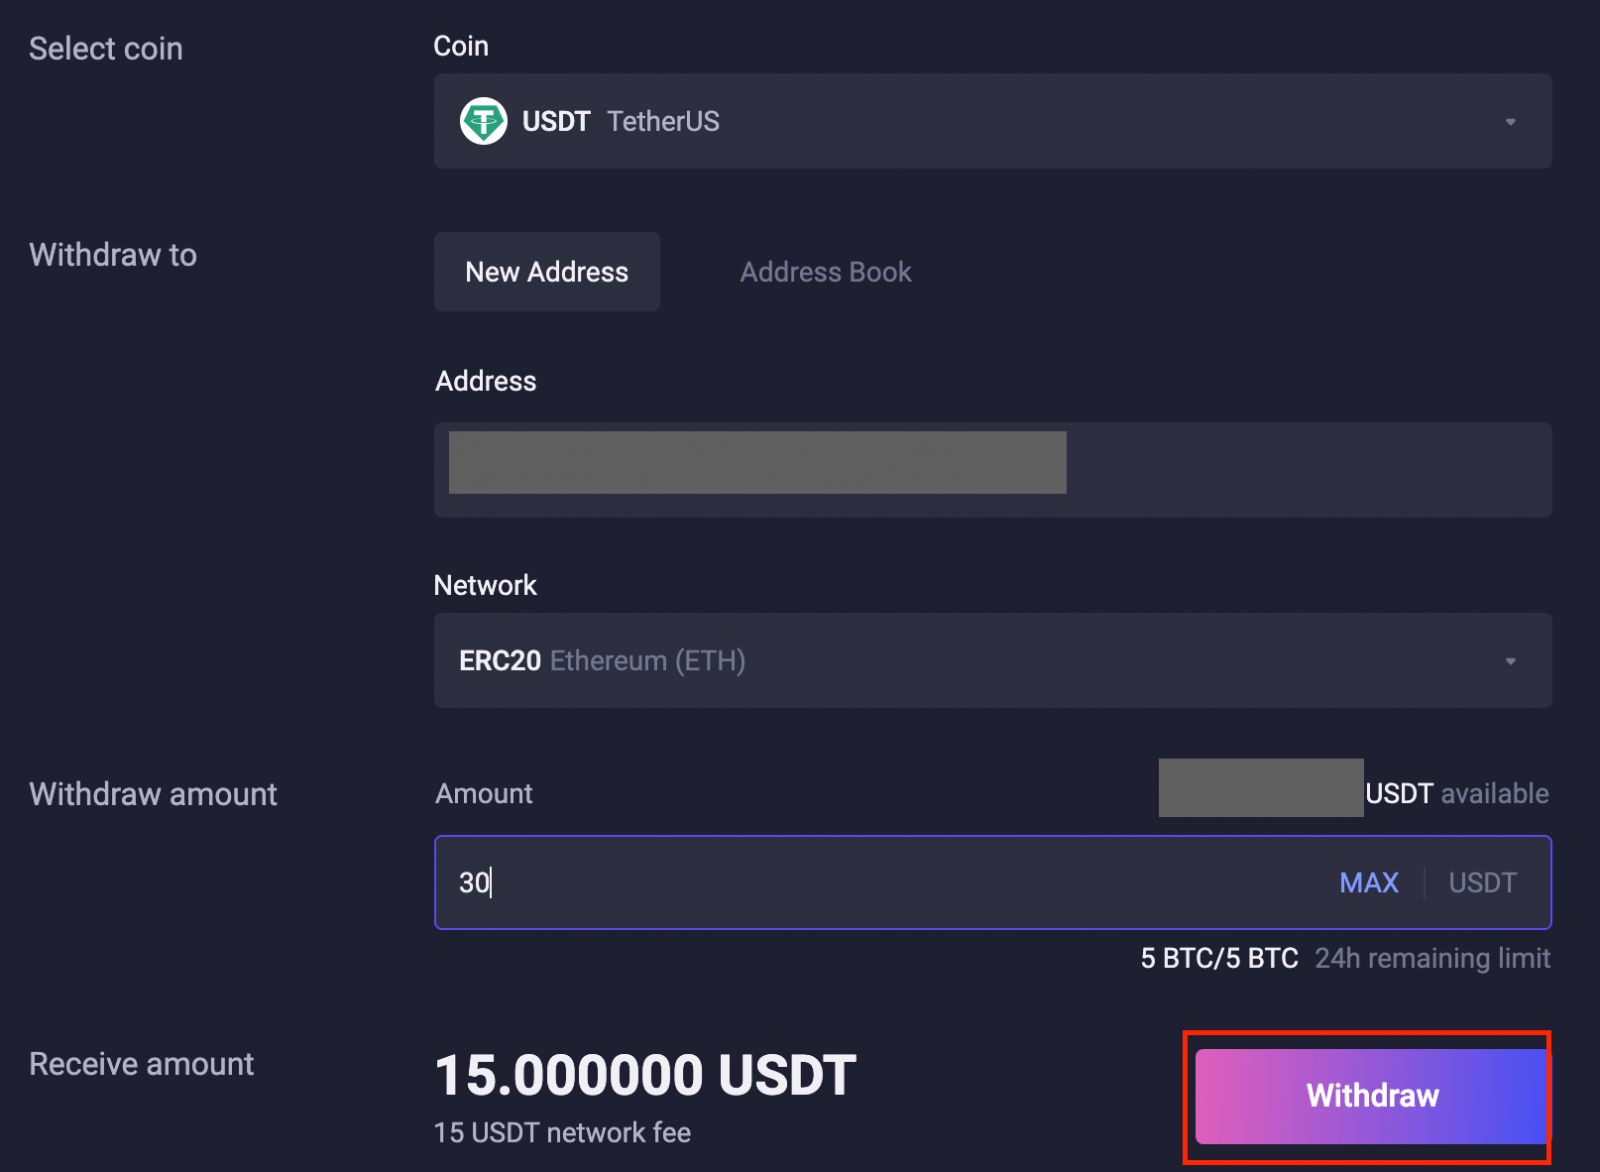 How to Withdraw from ApolloX